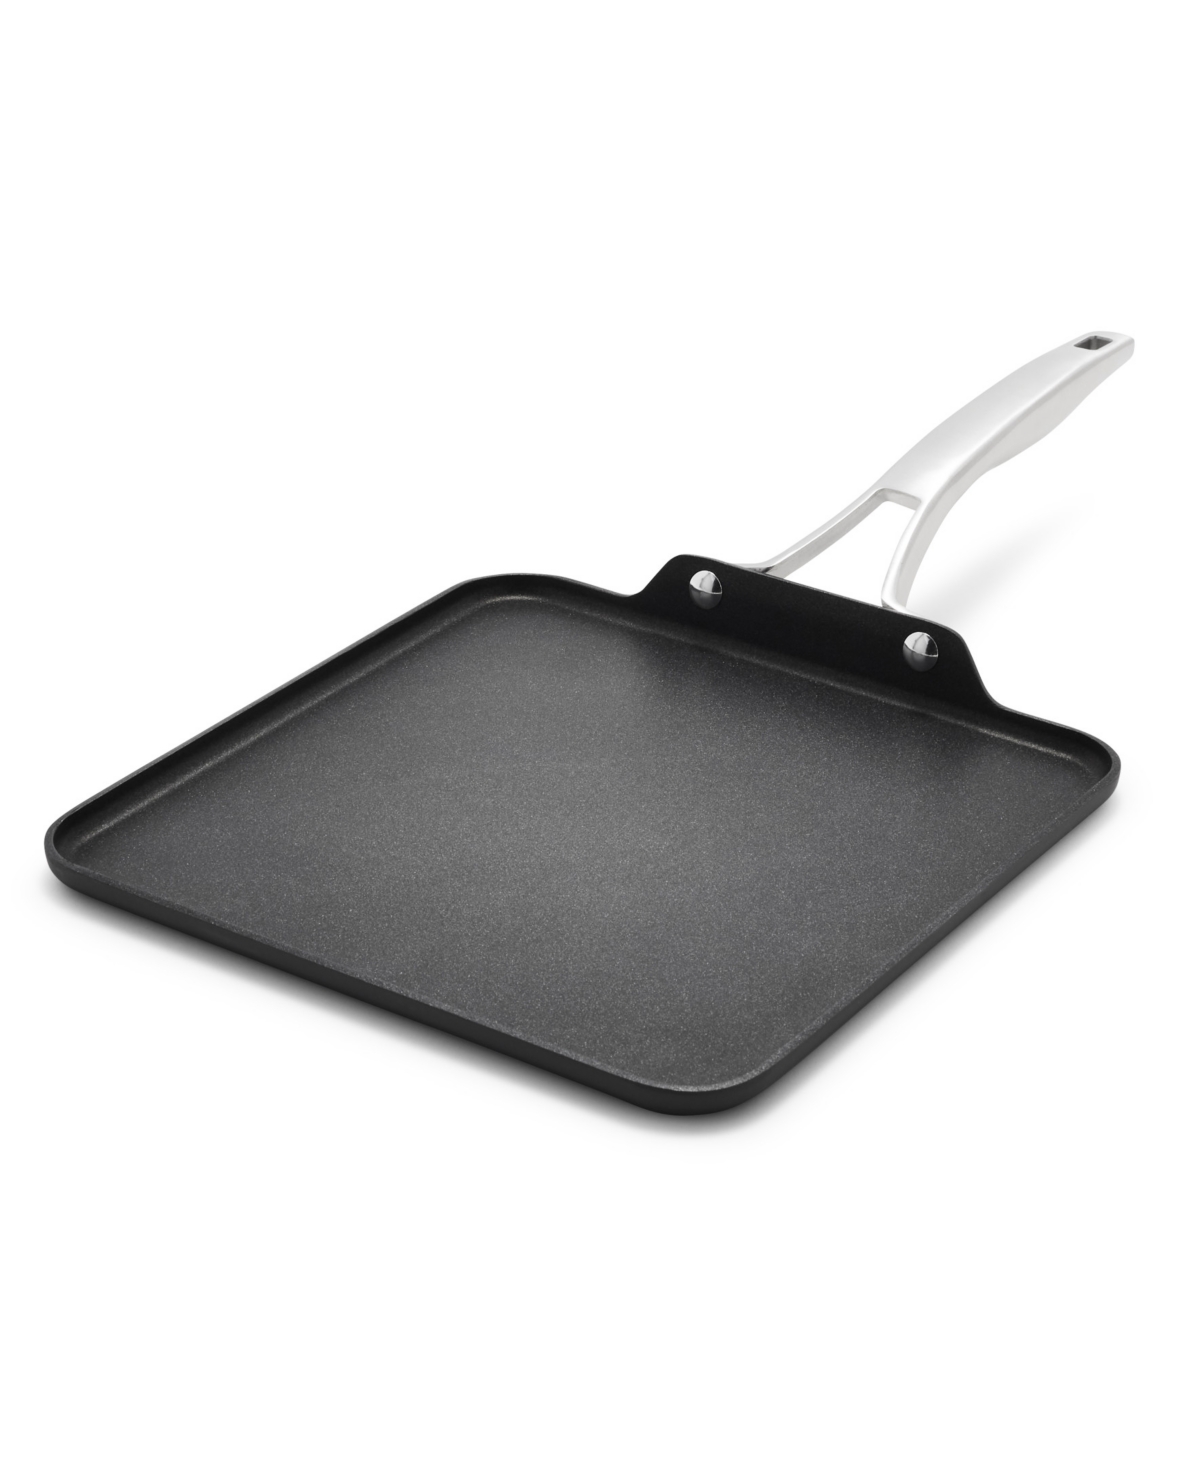 Calphalon Premier Hard-anodized Nonstick 11" Square Griddle Pan In Black,stainless Steel